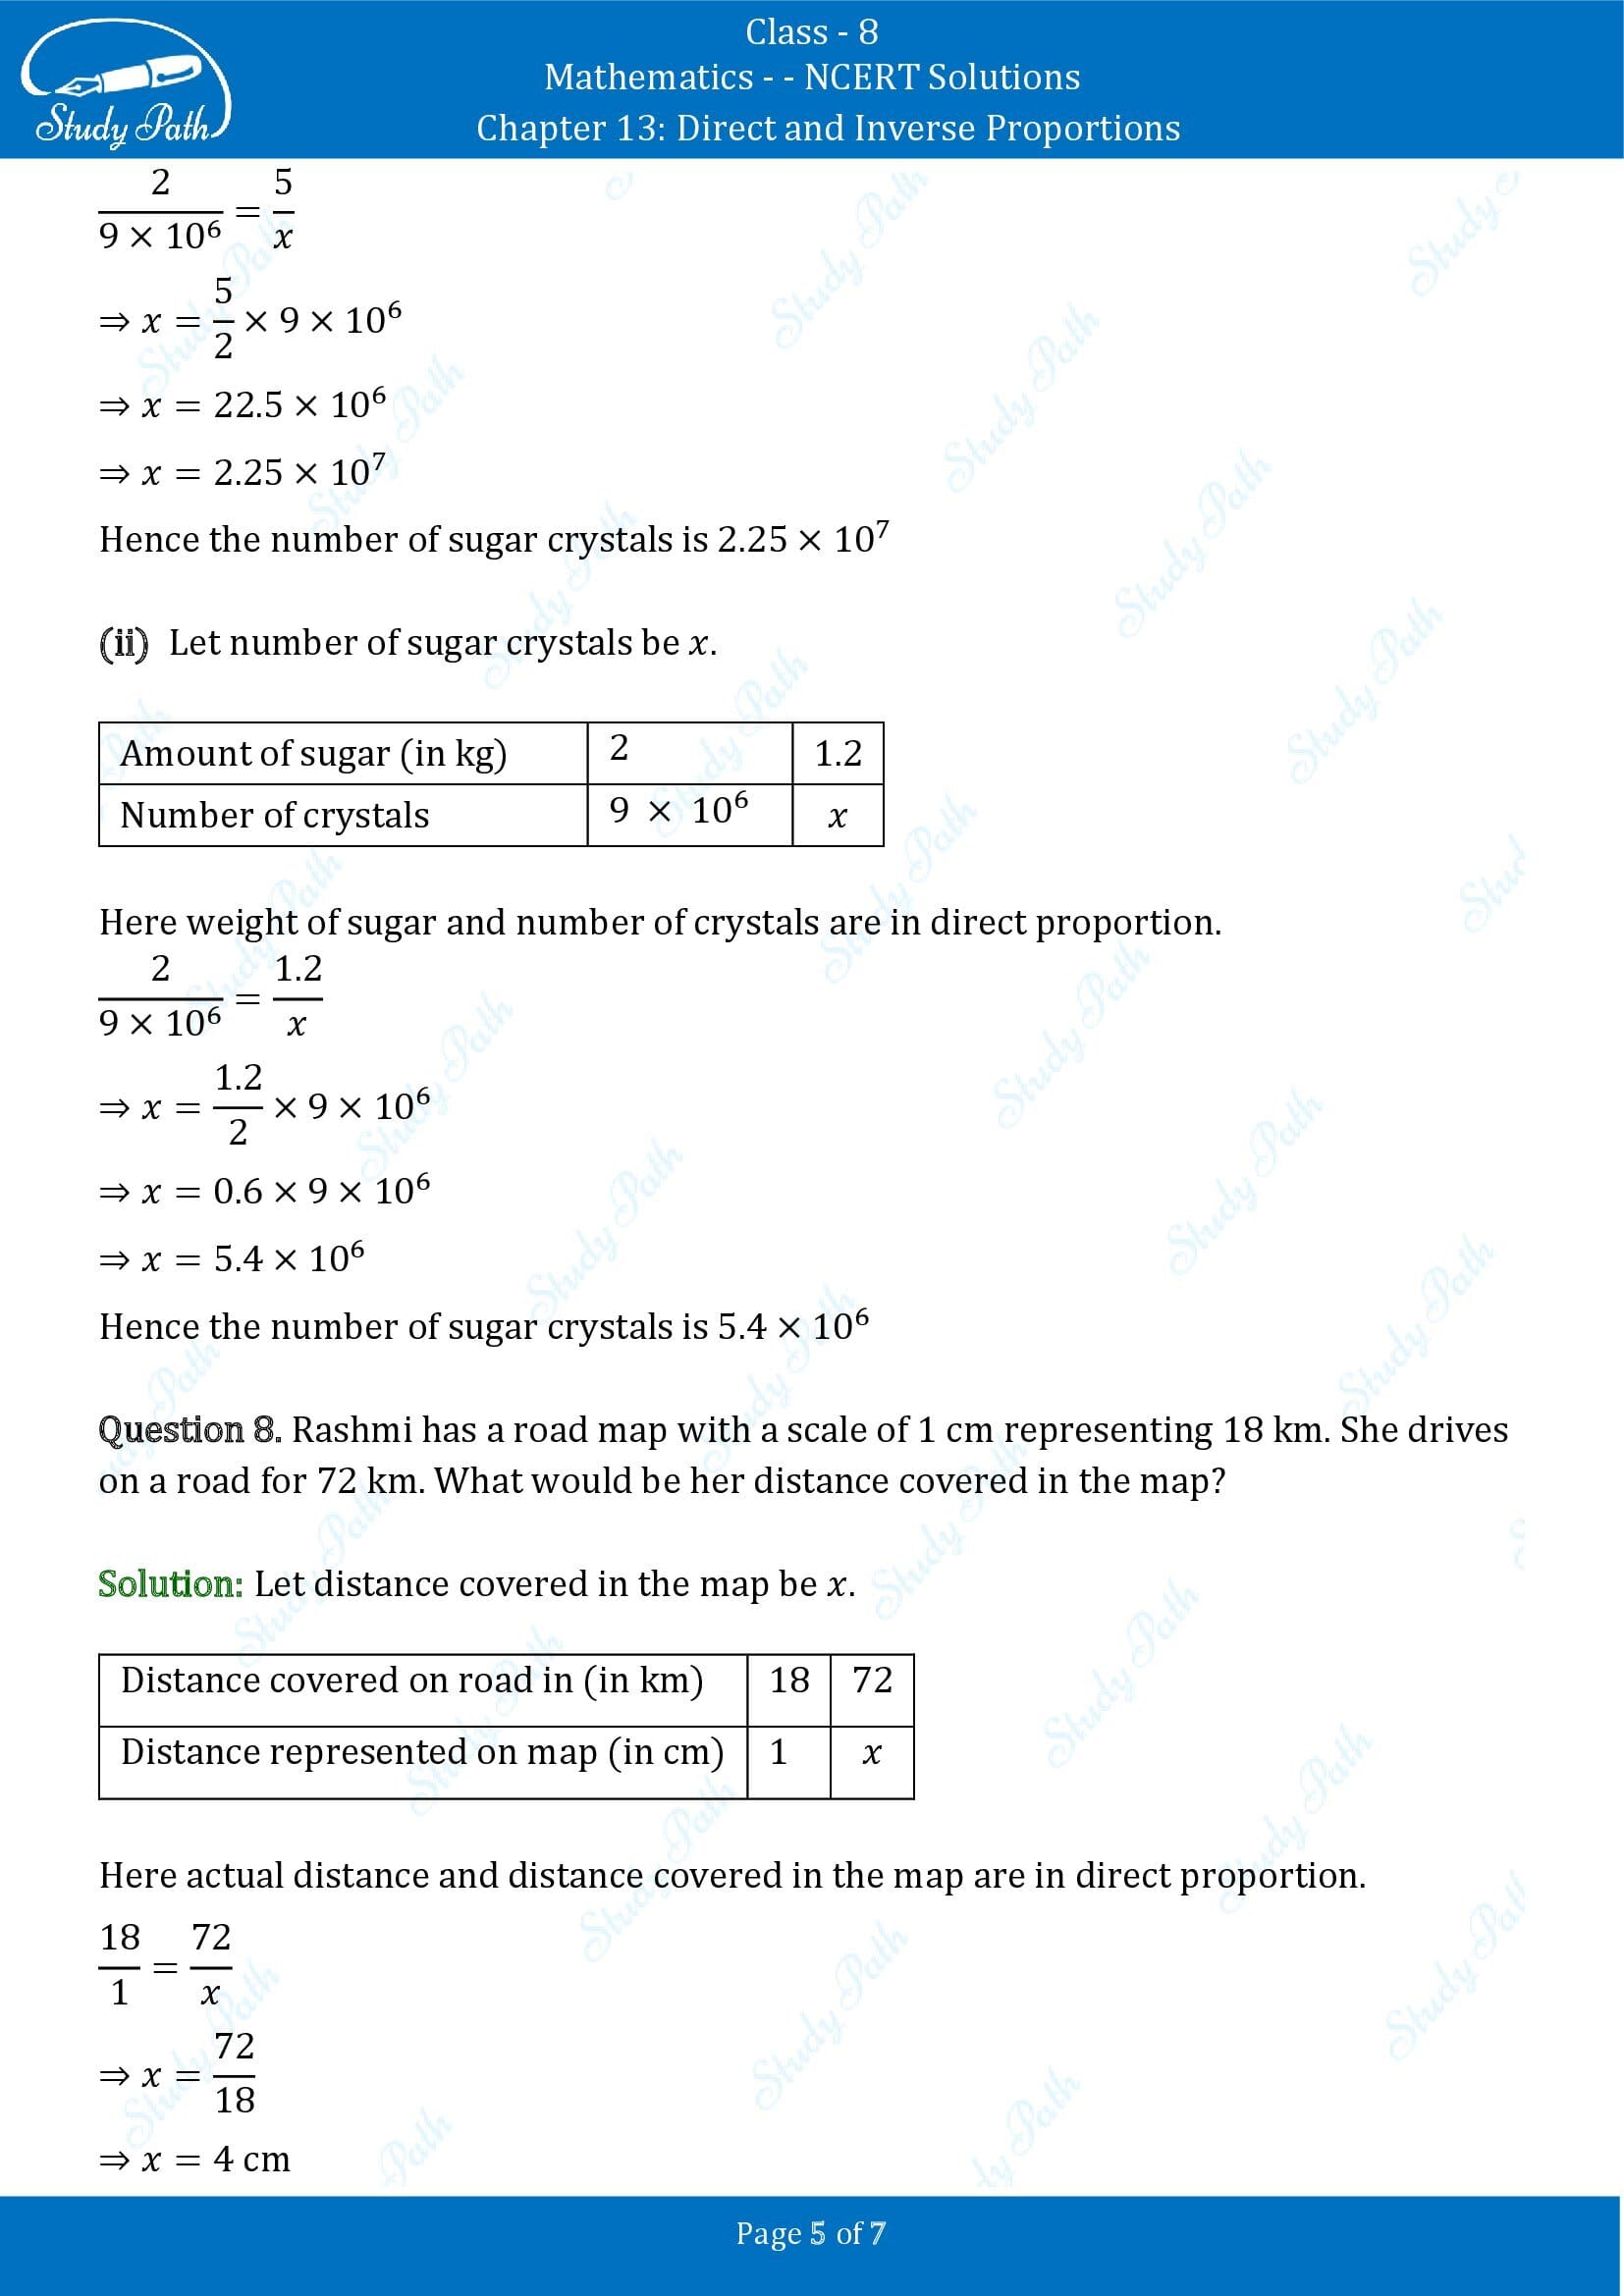 NCERT Solutions for Class 8 Maths Chapter 13 Direct and Inverse Proportions Exercise 13.1 00005